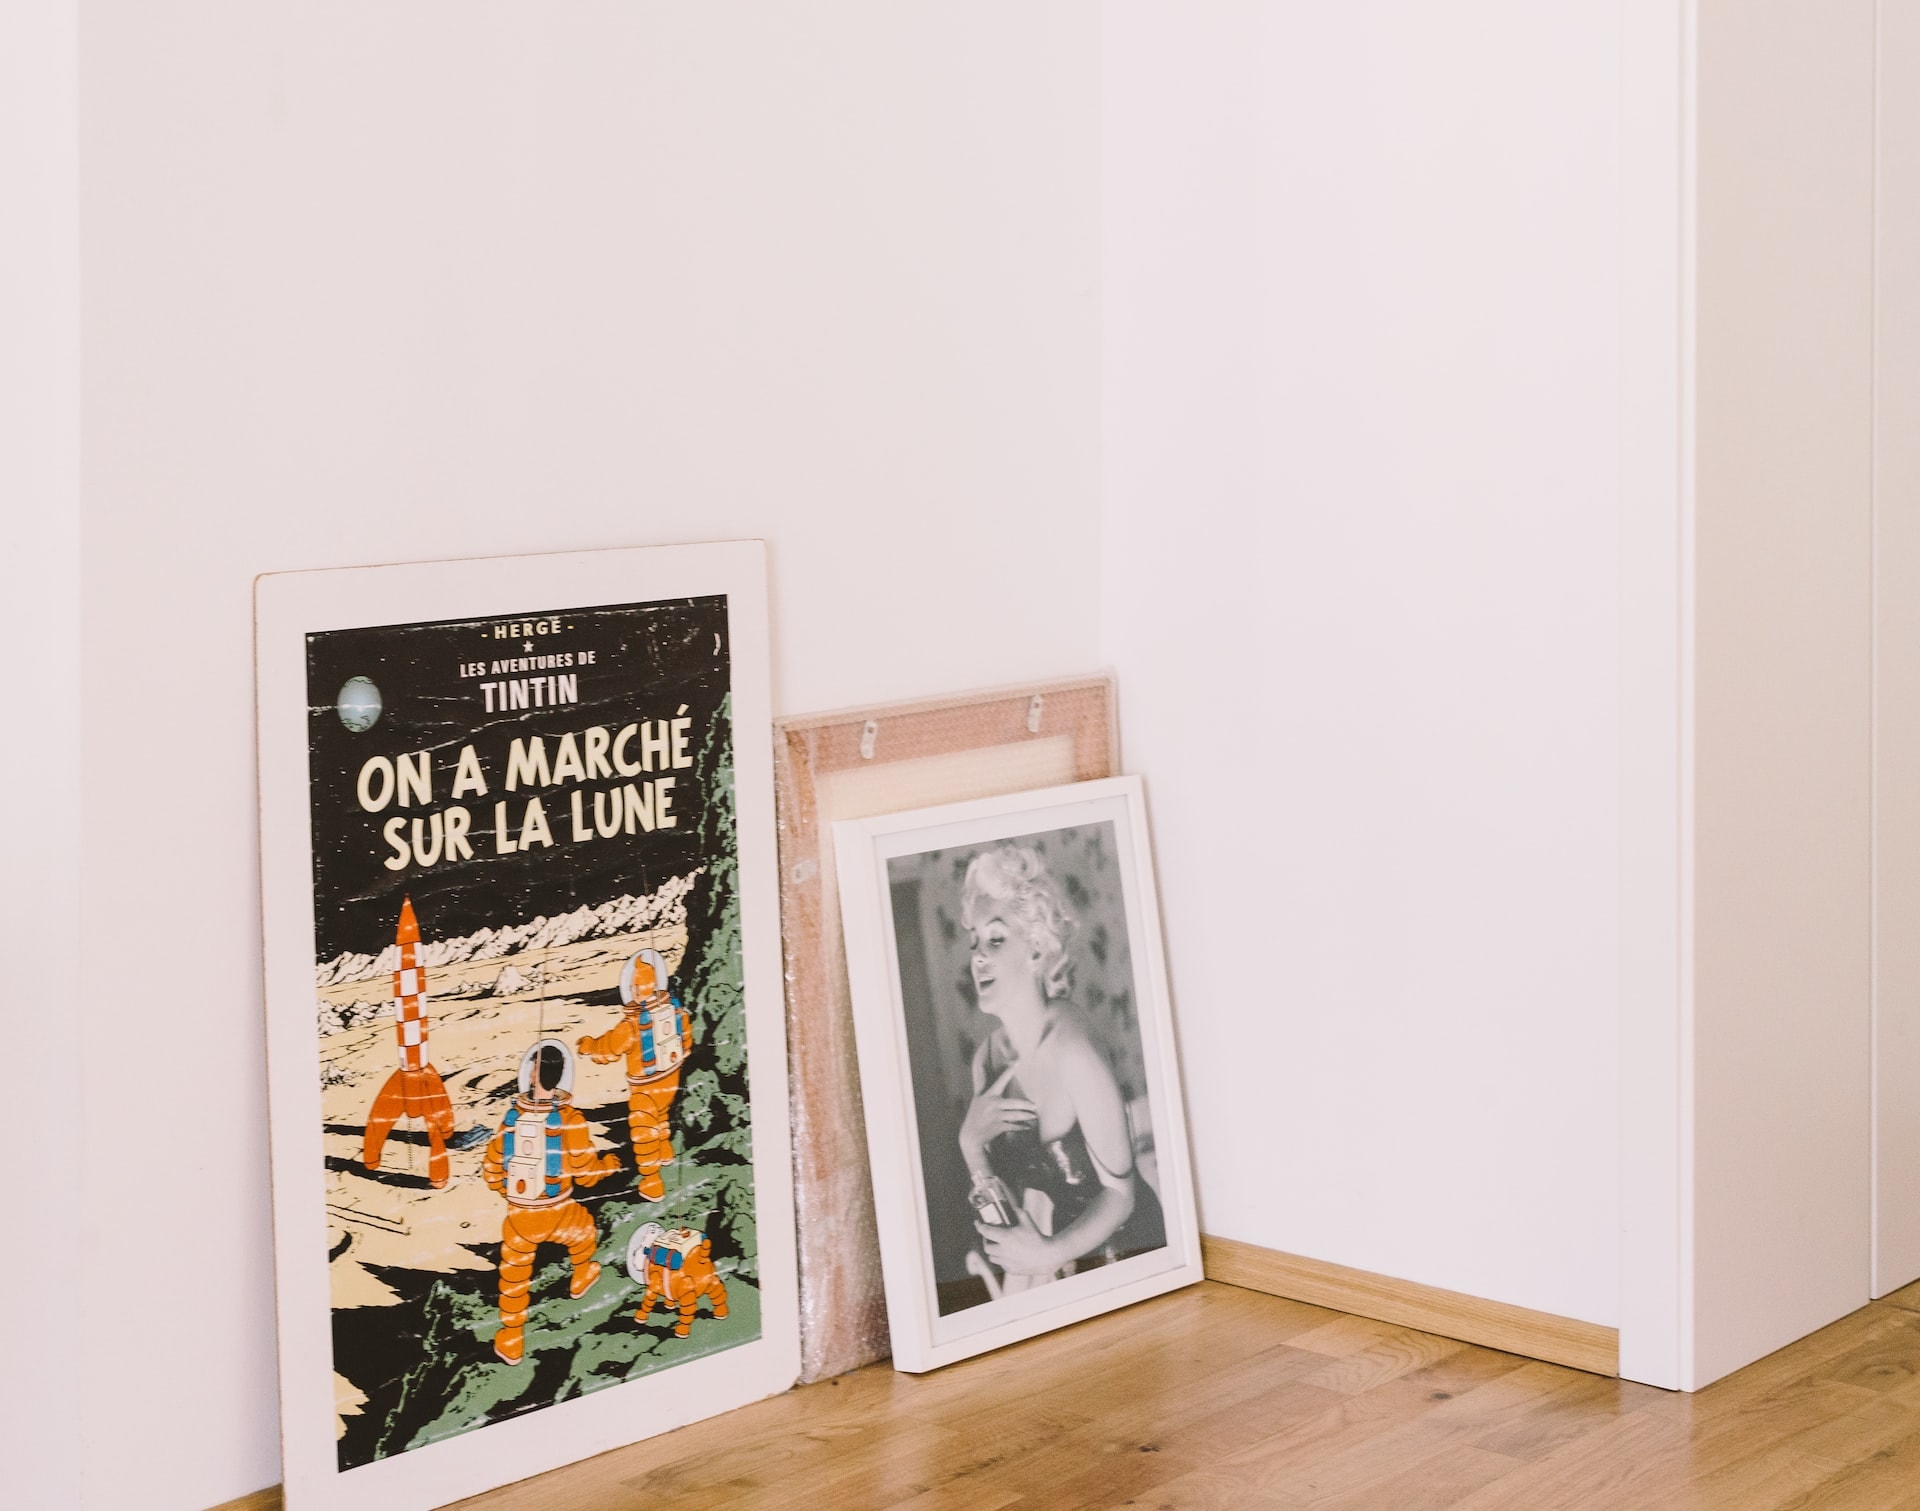 3 tips for hanging posters in your home